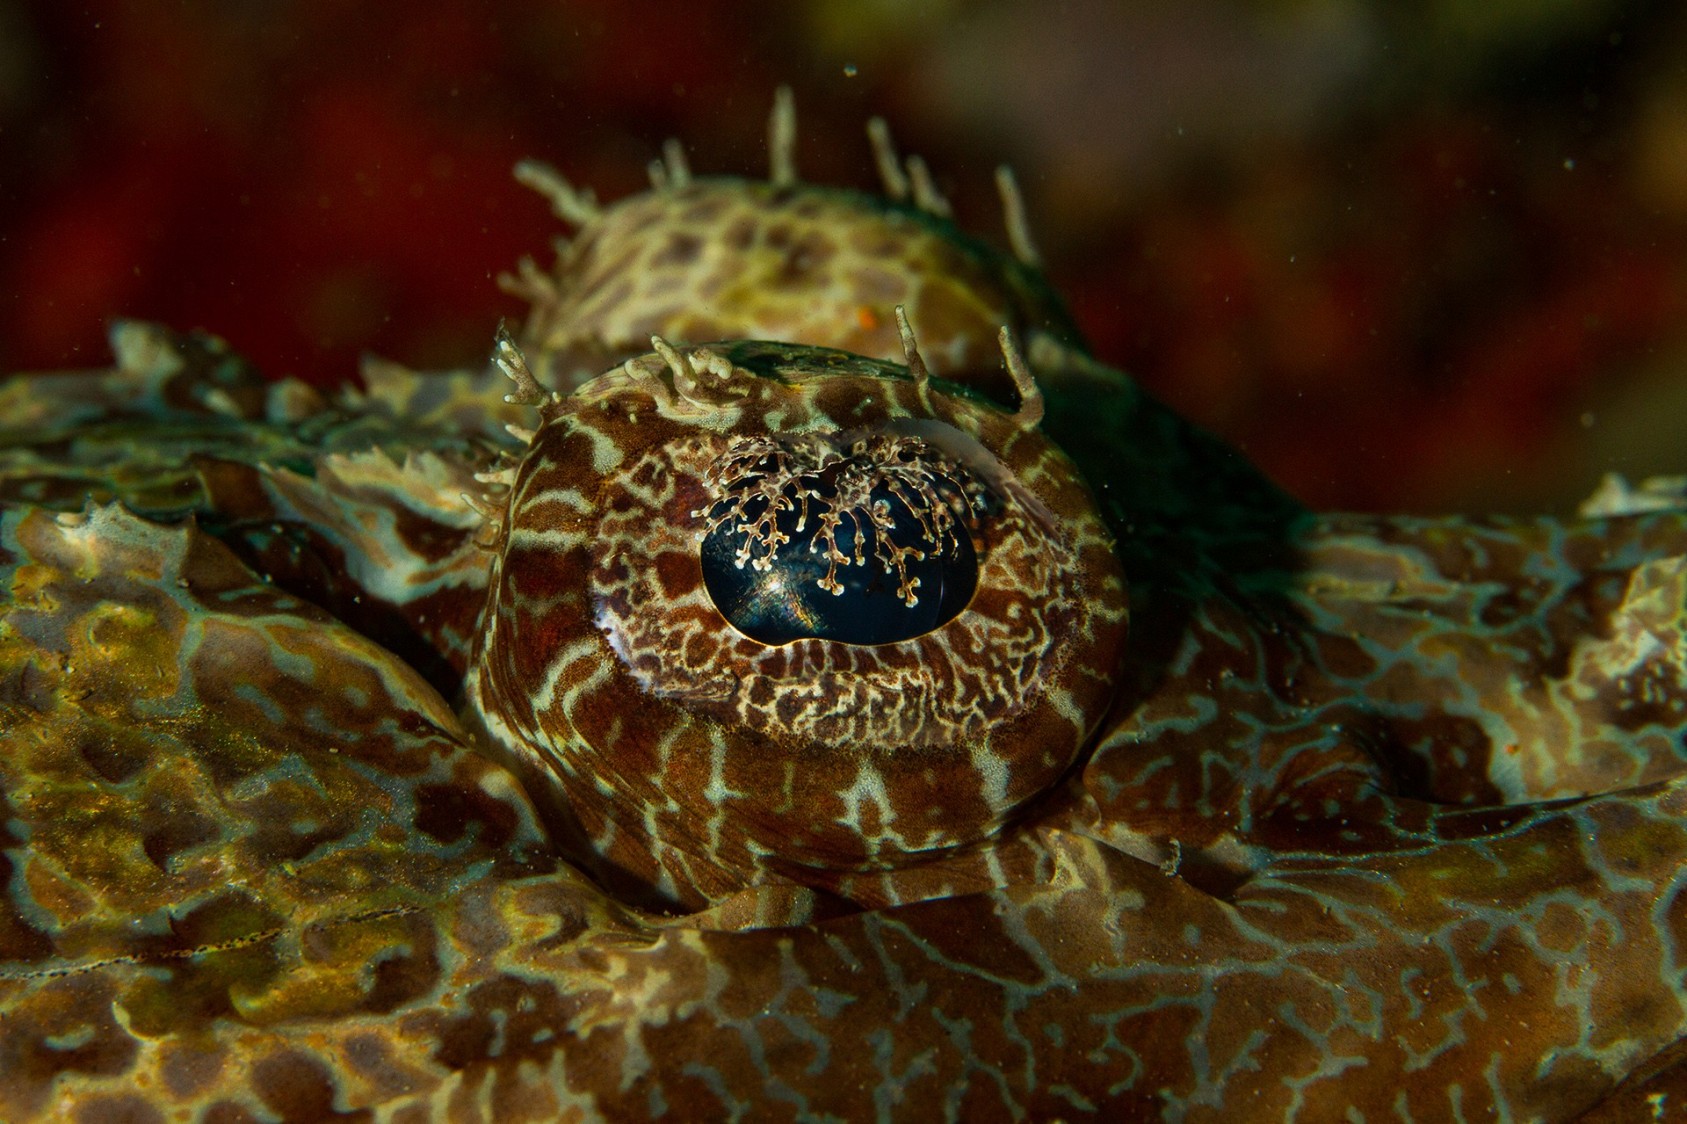 Looking closely at the eye of this Crocodile Fish, I noticed an overgrowth. When I read more about it later, I learned that these are called lappets, which break the reflective surface of the eye and help the fish blend in better with its surroundings. Without them, it would be easier for its predators to spot it.